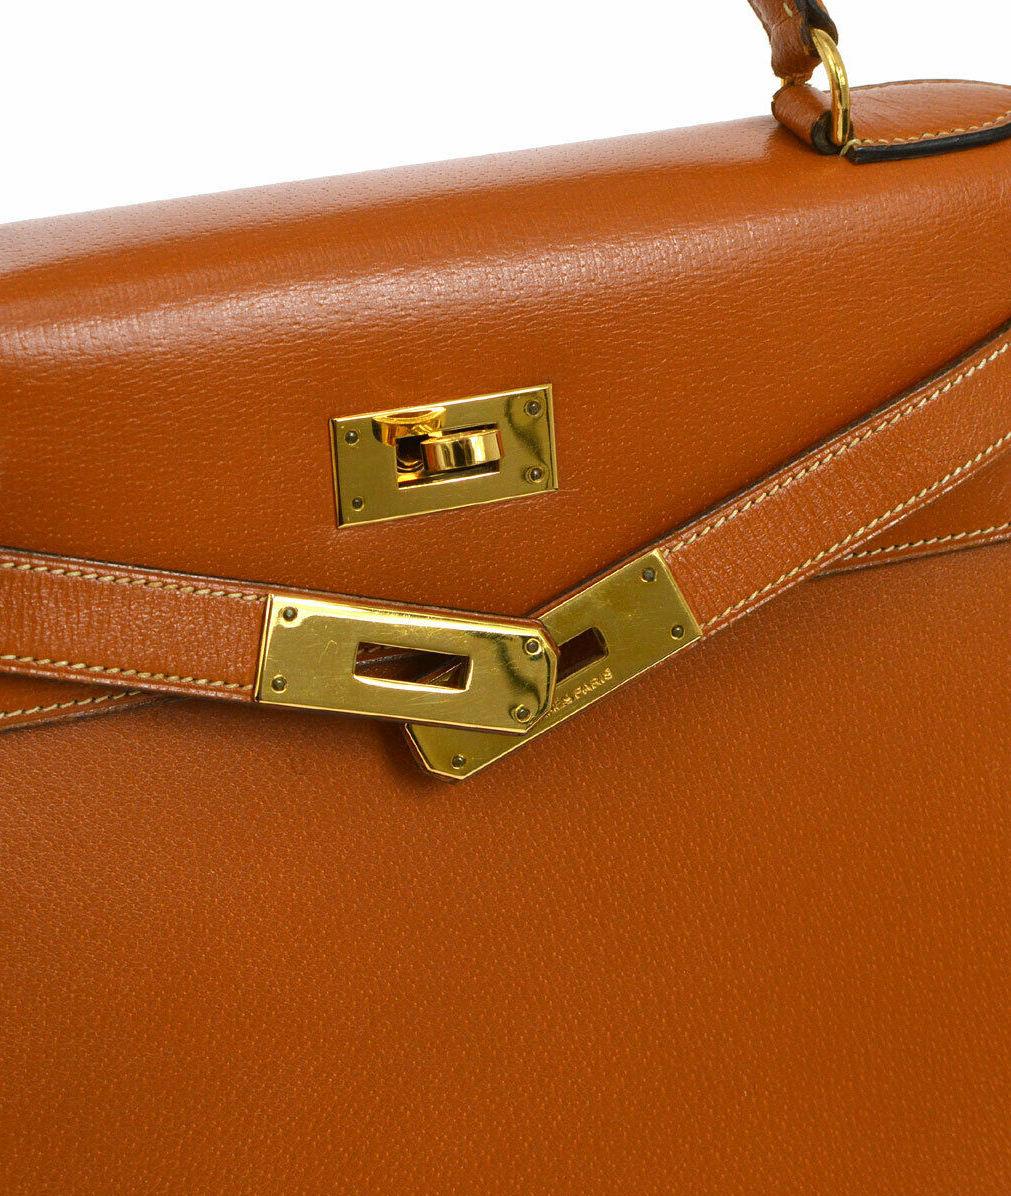 Hermes Kelly 28 Cognac Leather Gold Evening Top Handle Satchel Tote Bag

Leather
Gold tone hardware
Leather lining
Date code present
Made in France
Handle drop 3.5